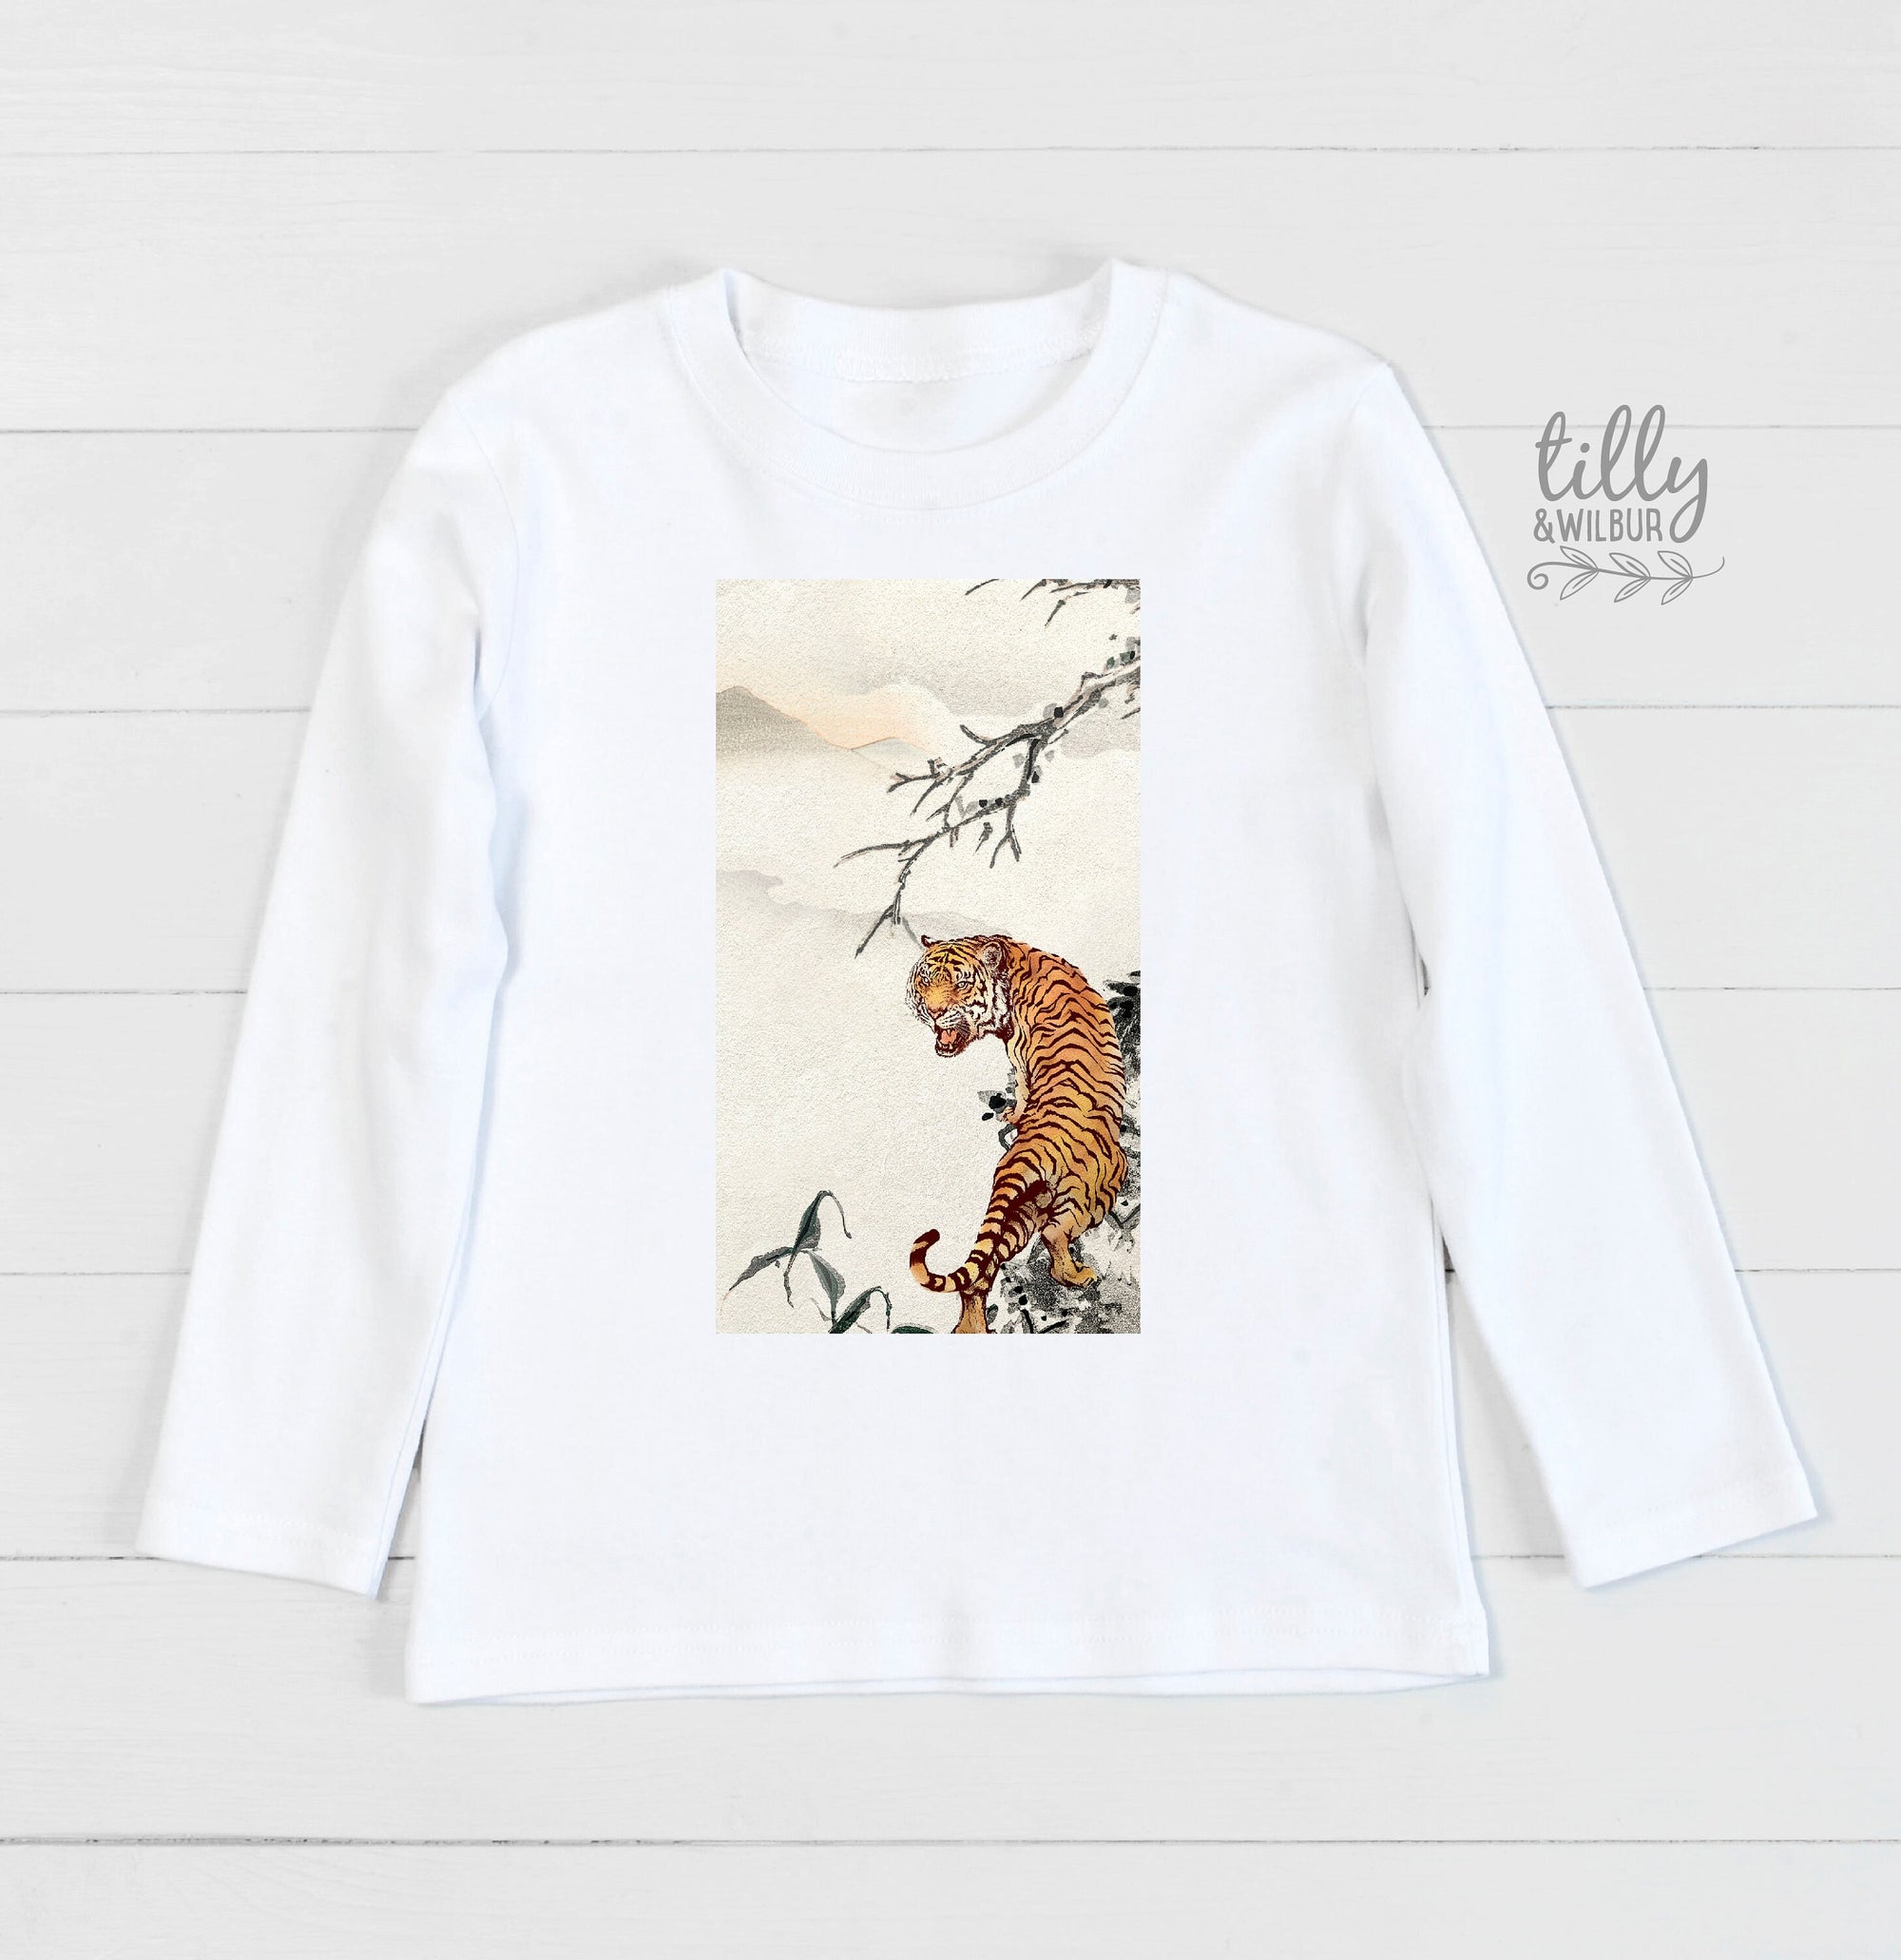 Year Of The Tiger T-Shirt, Lunar New Year T-Shirt, Happy Lunar New Year T-Shirt, Year Of The Tiger 2022, Chinese Lunar New Year 2022